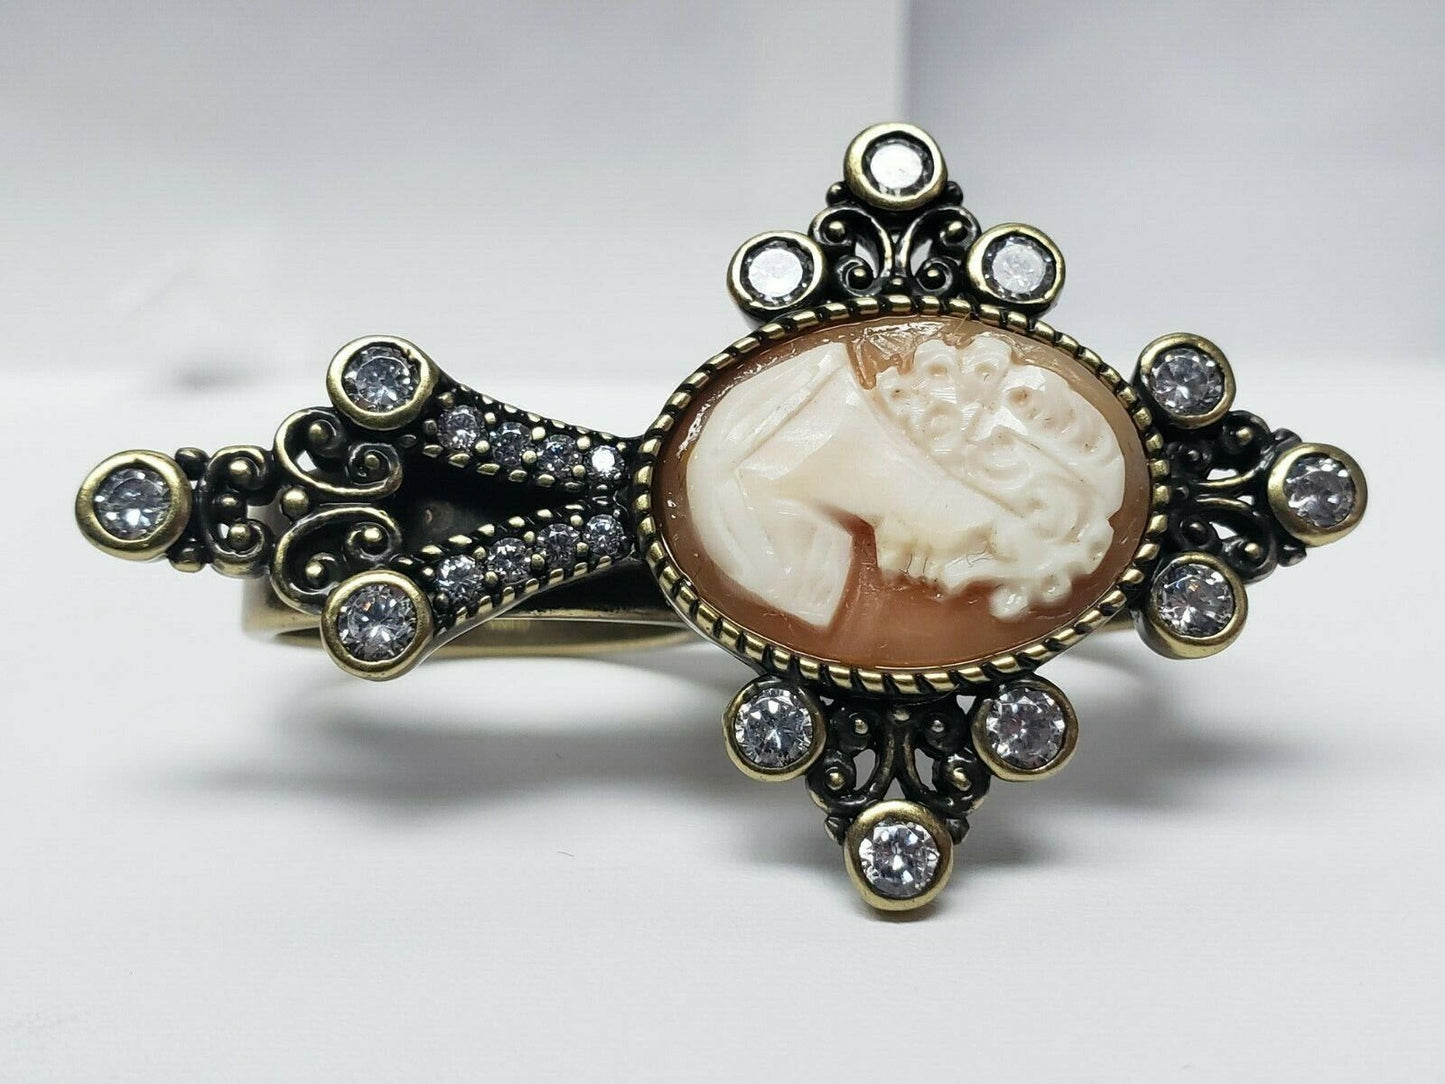 Amedeo 18Mm Cameo Crystal Double Finger Ring Size 9-10 | Ring